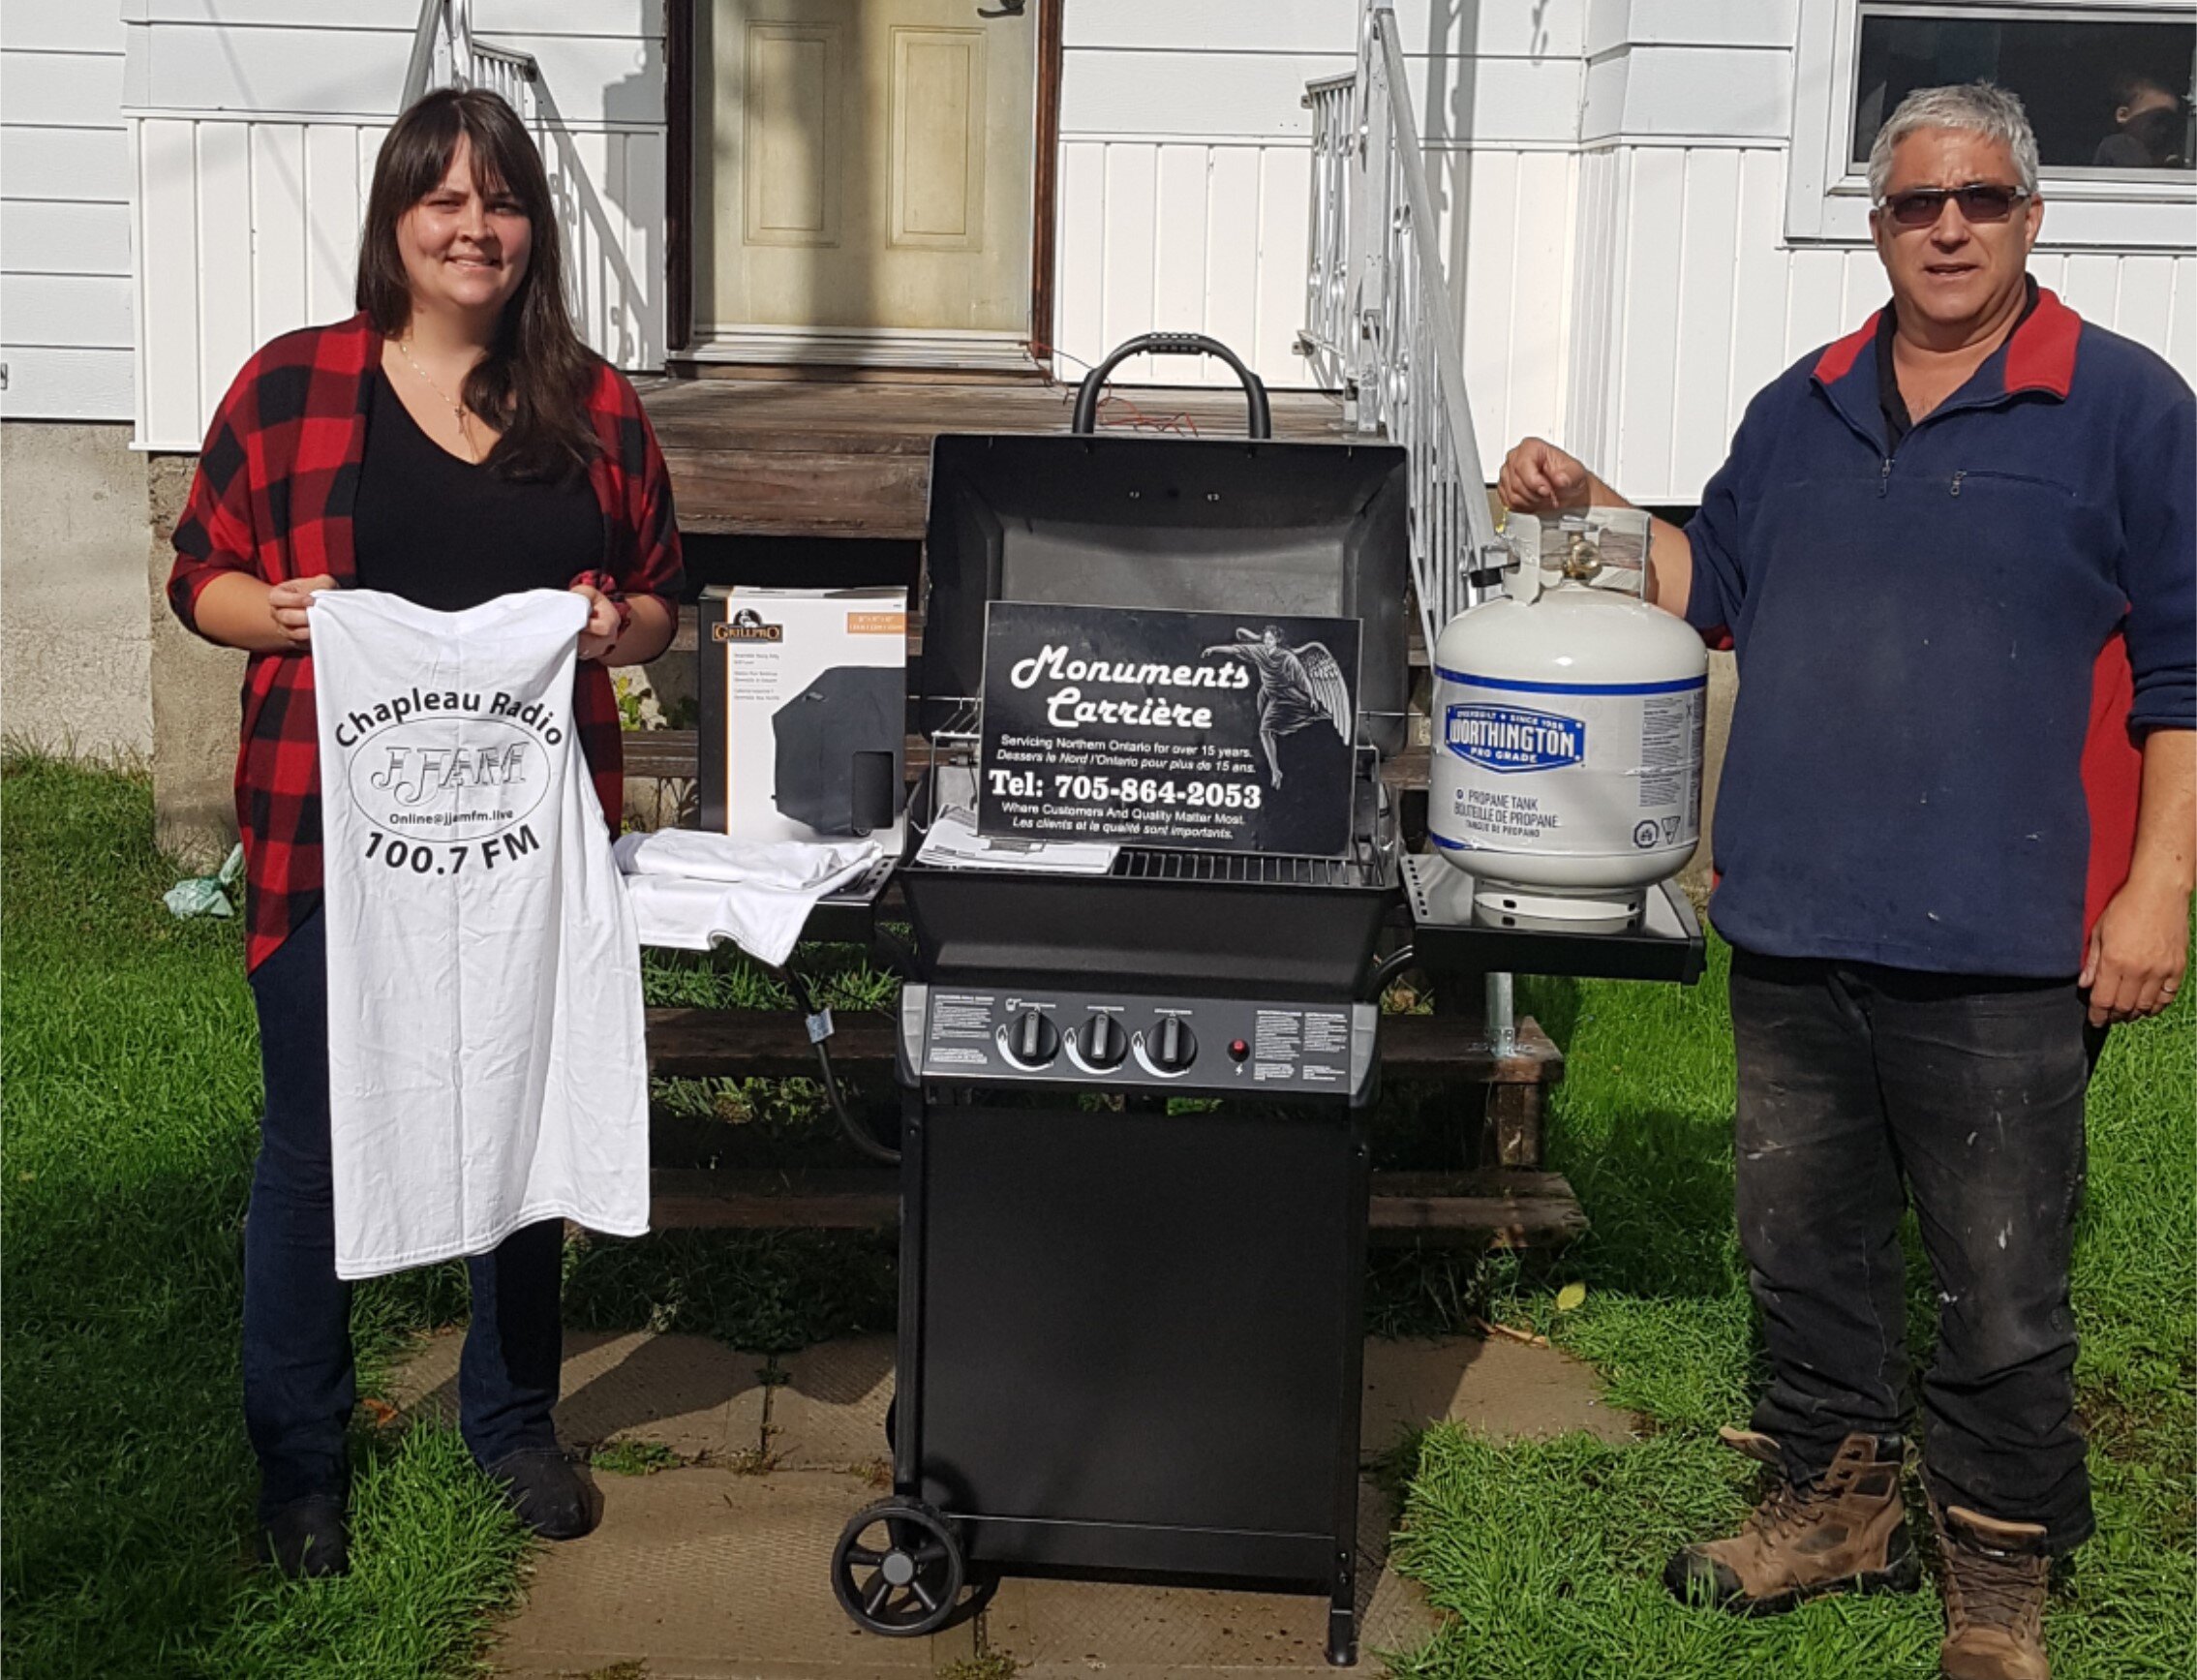 Monuments Carriere-Ultimate BBQ Giveaway -Prize drawn Sept 27 2019